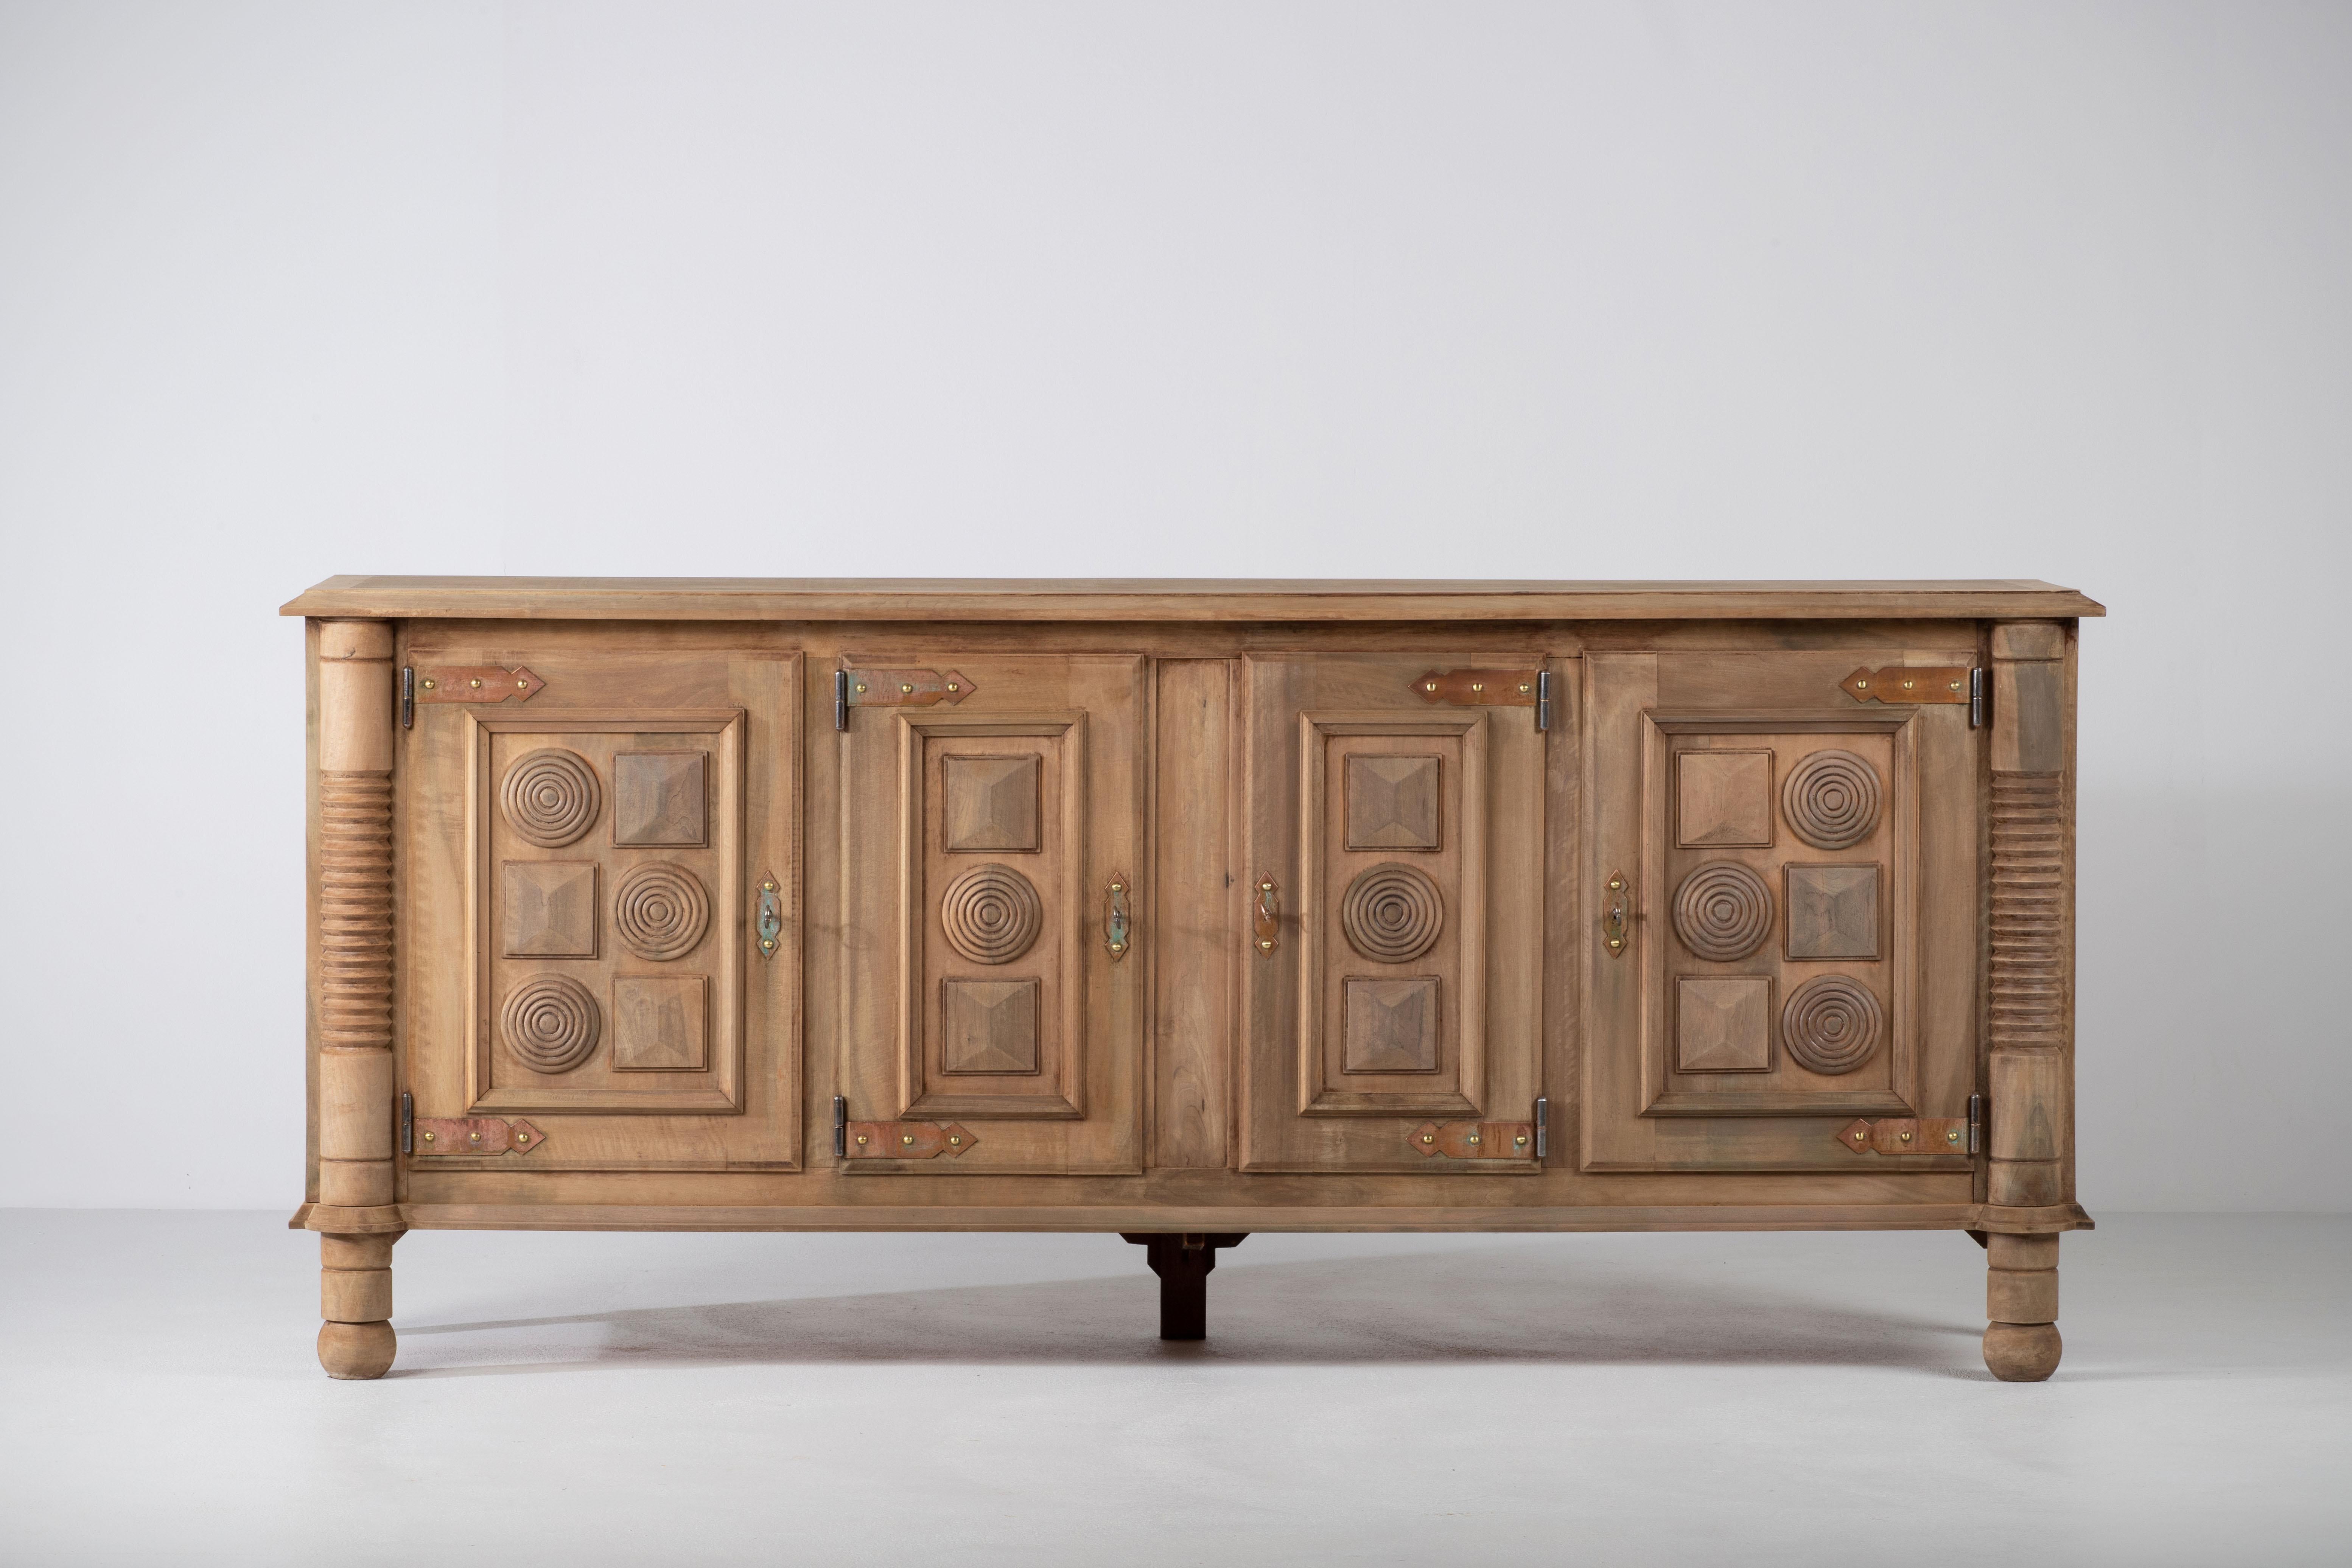 A large sideboard/credenza in solid natural oak attributed to Charles Dudouyt, France, circa 1940s.
Consists of 3 central drawers and two storage compartments. 
Original brass detailing and graphic design doors make this piece really stand